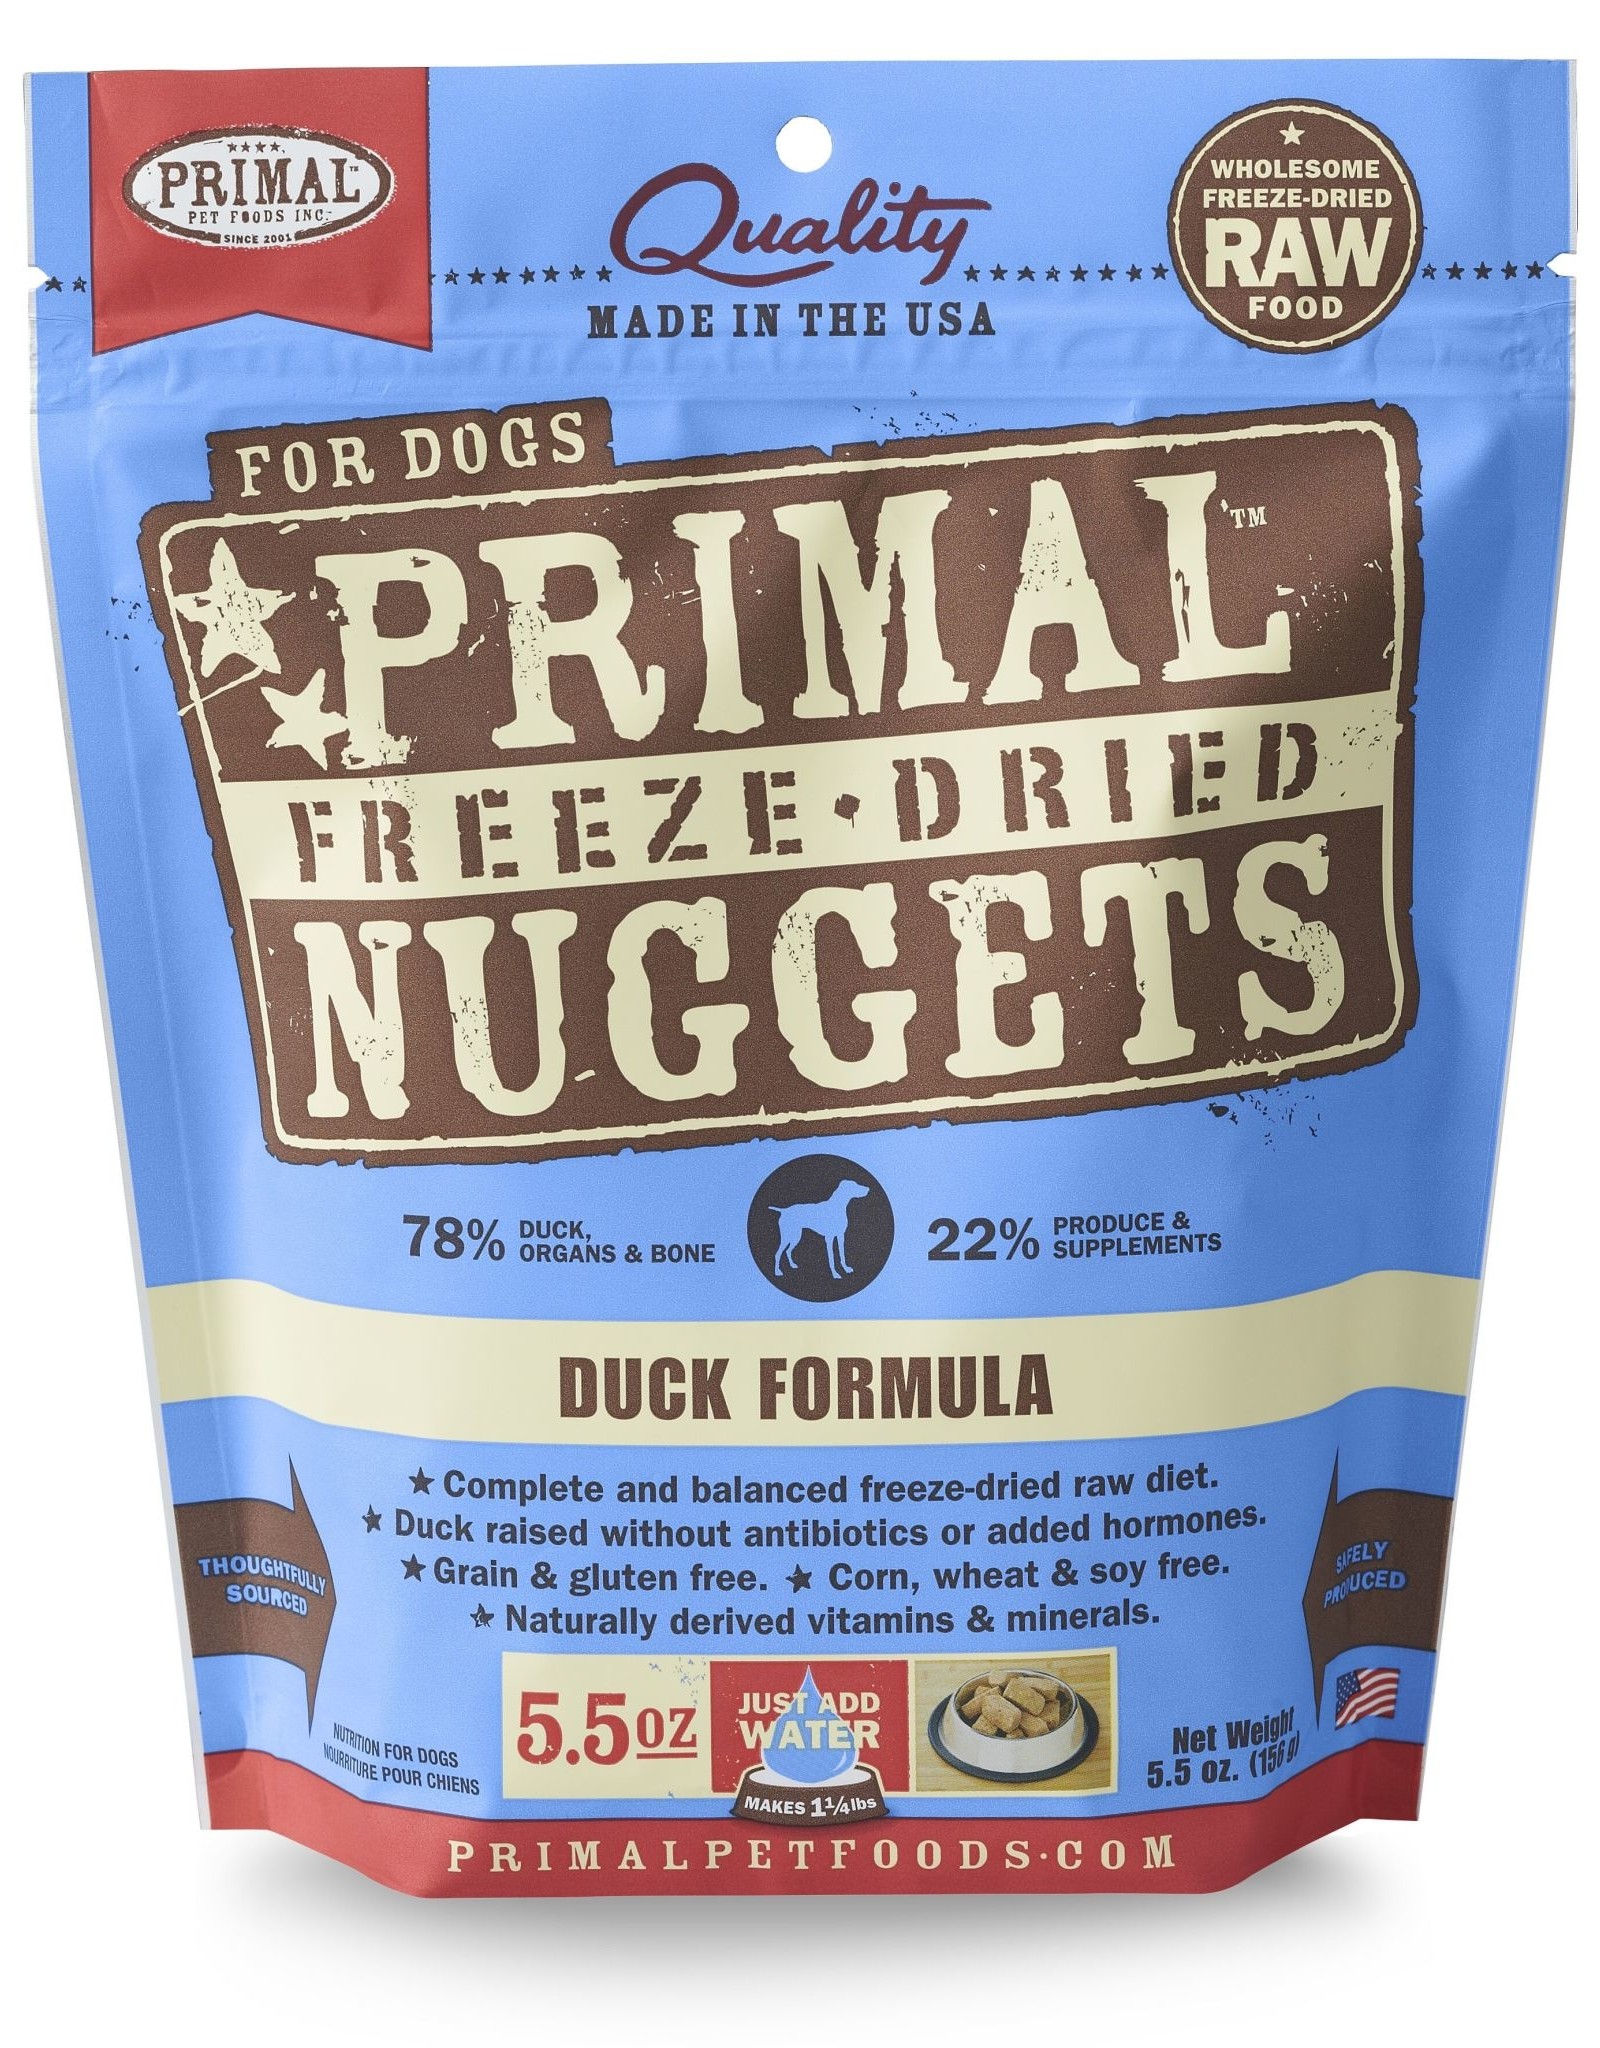 PRIMAL PET FOODS PRIMAL Raw Freeze-Dried Nuggets Canine Duck Formula